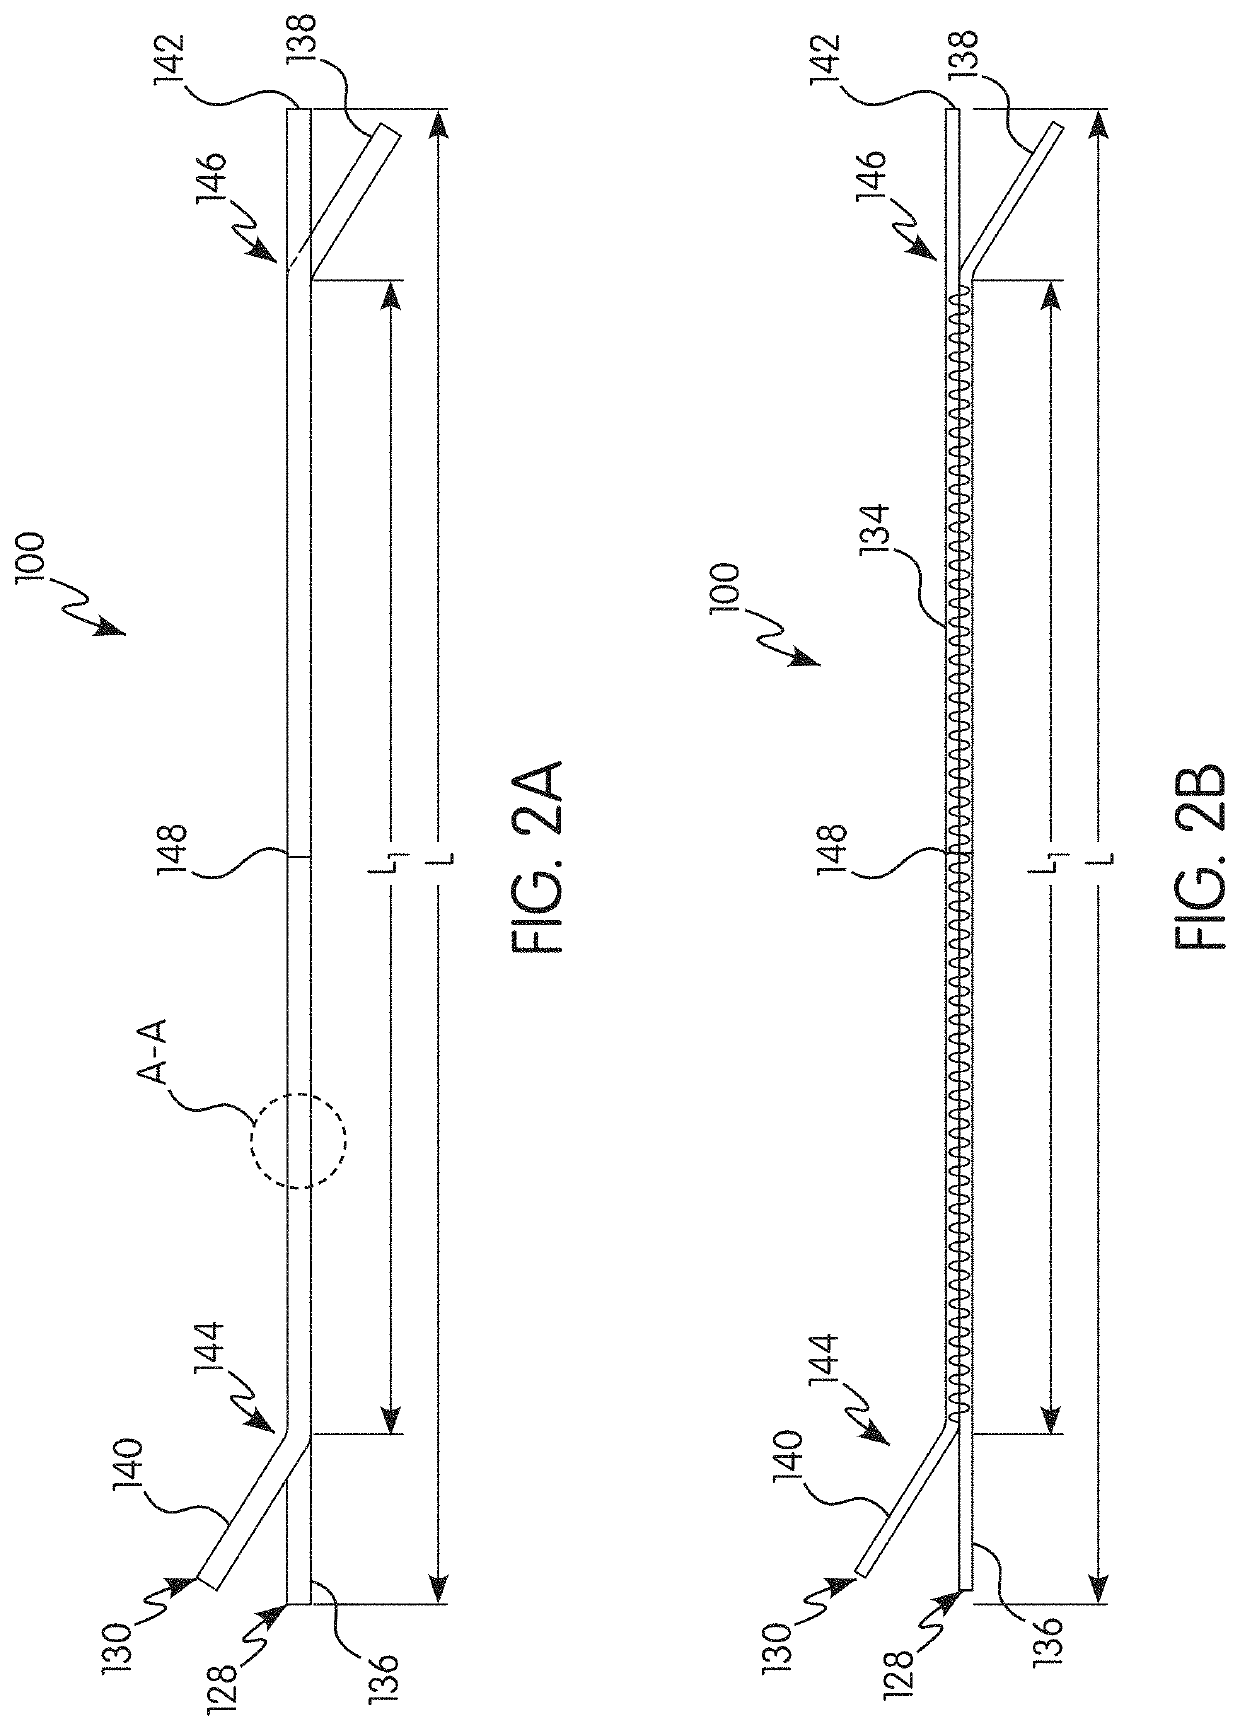 Energy absorber coil for safety harness